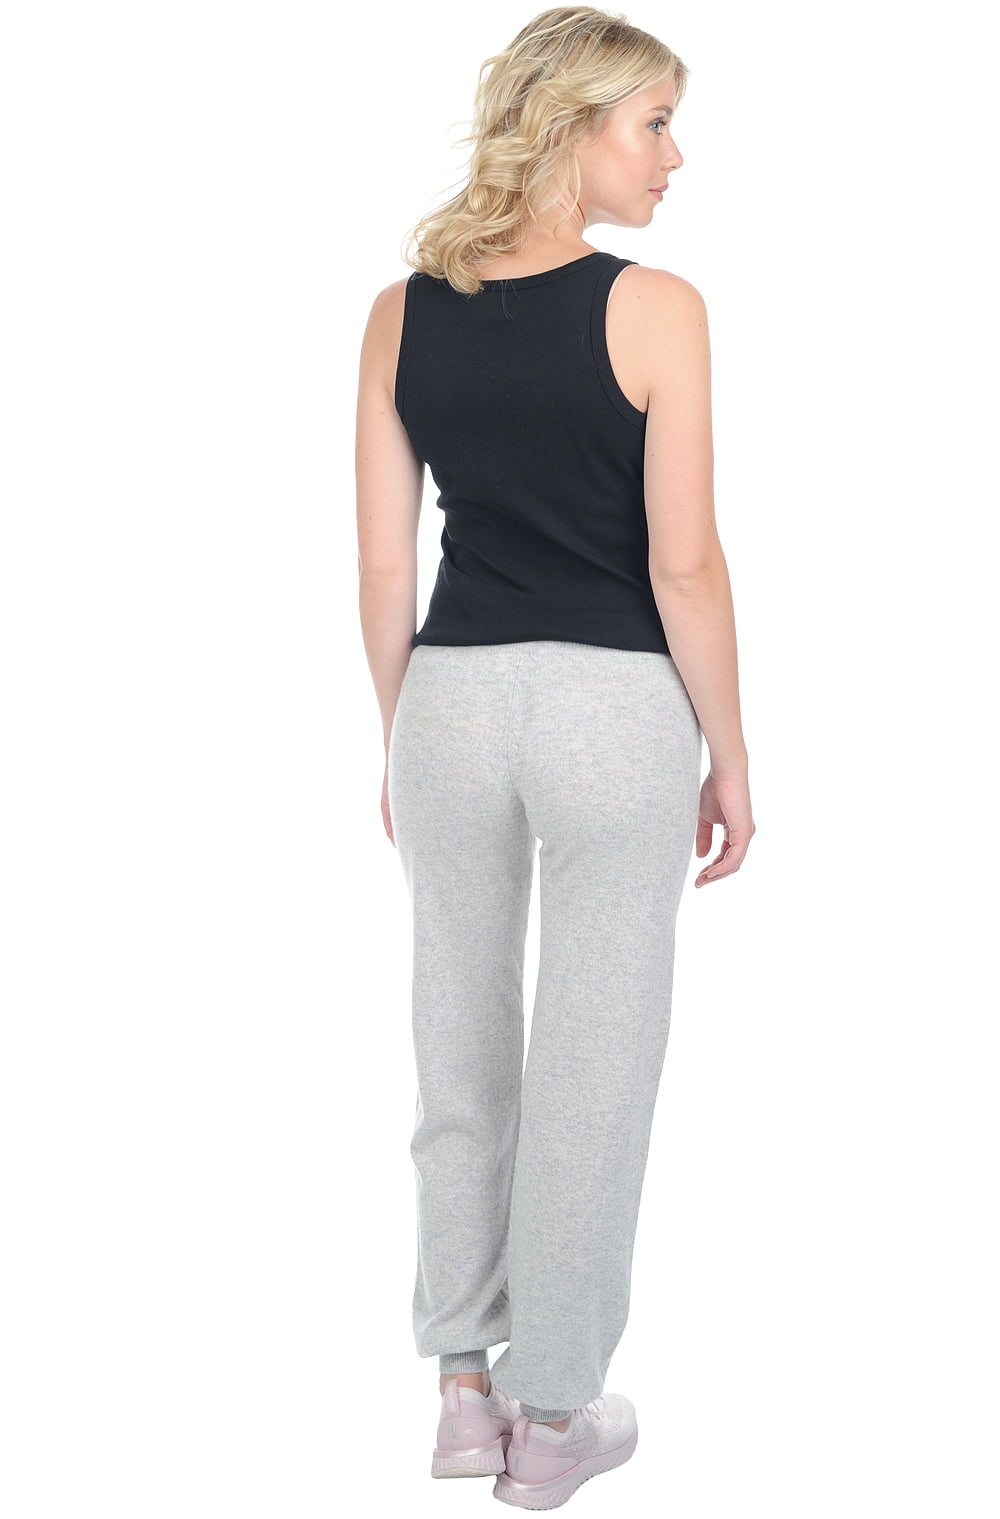 Cashmere ladies trousers leggings olly flanelle chine s